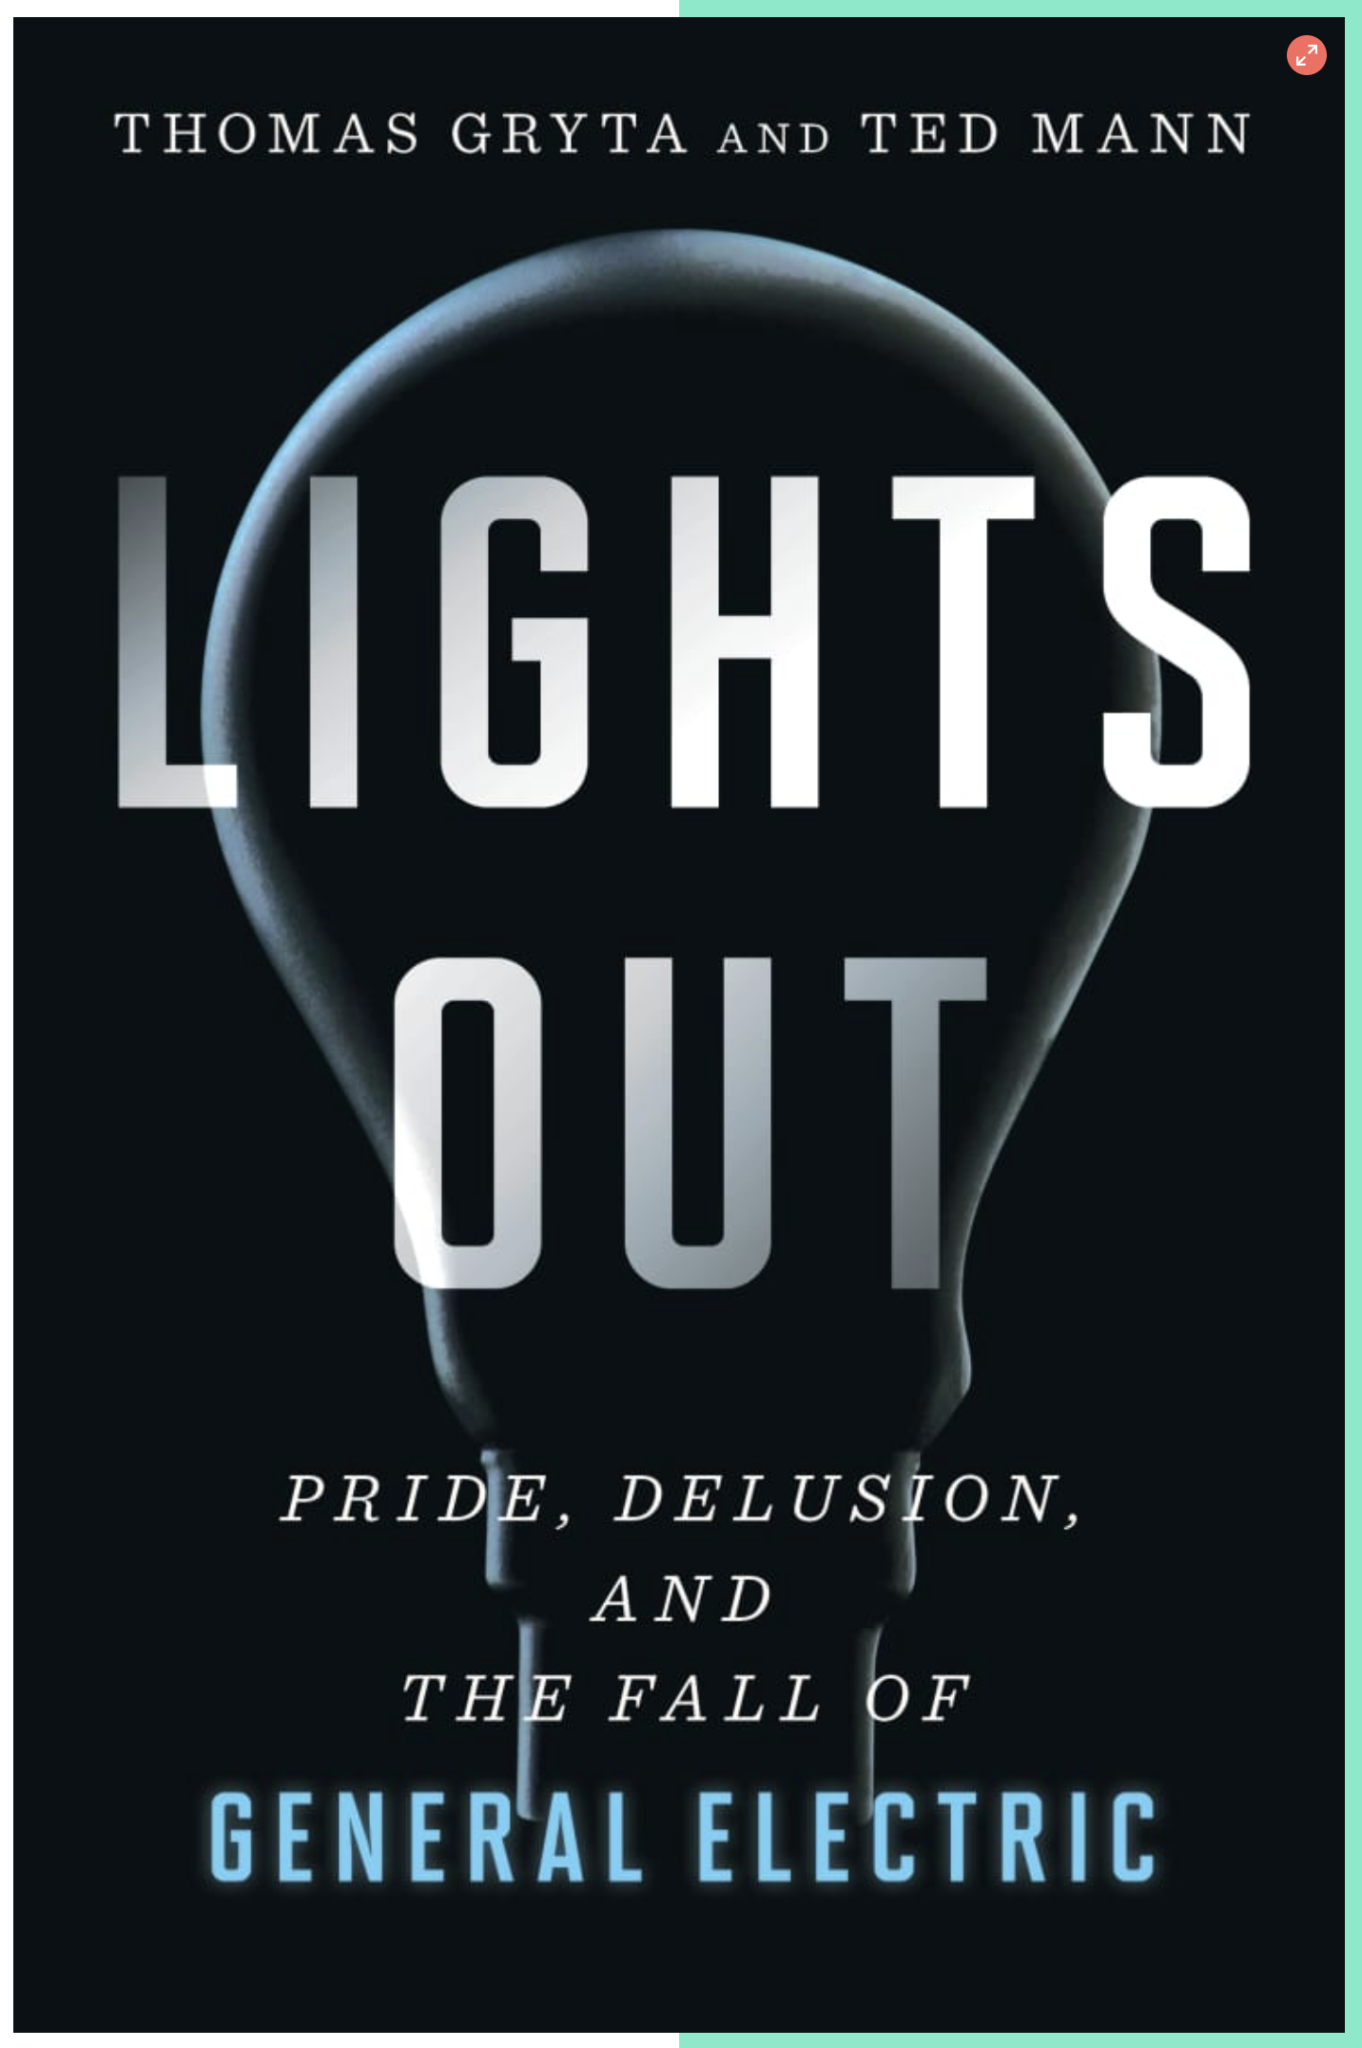 Bill Gates recommends 5 books for summer 2021 including Lights Out